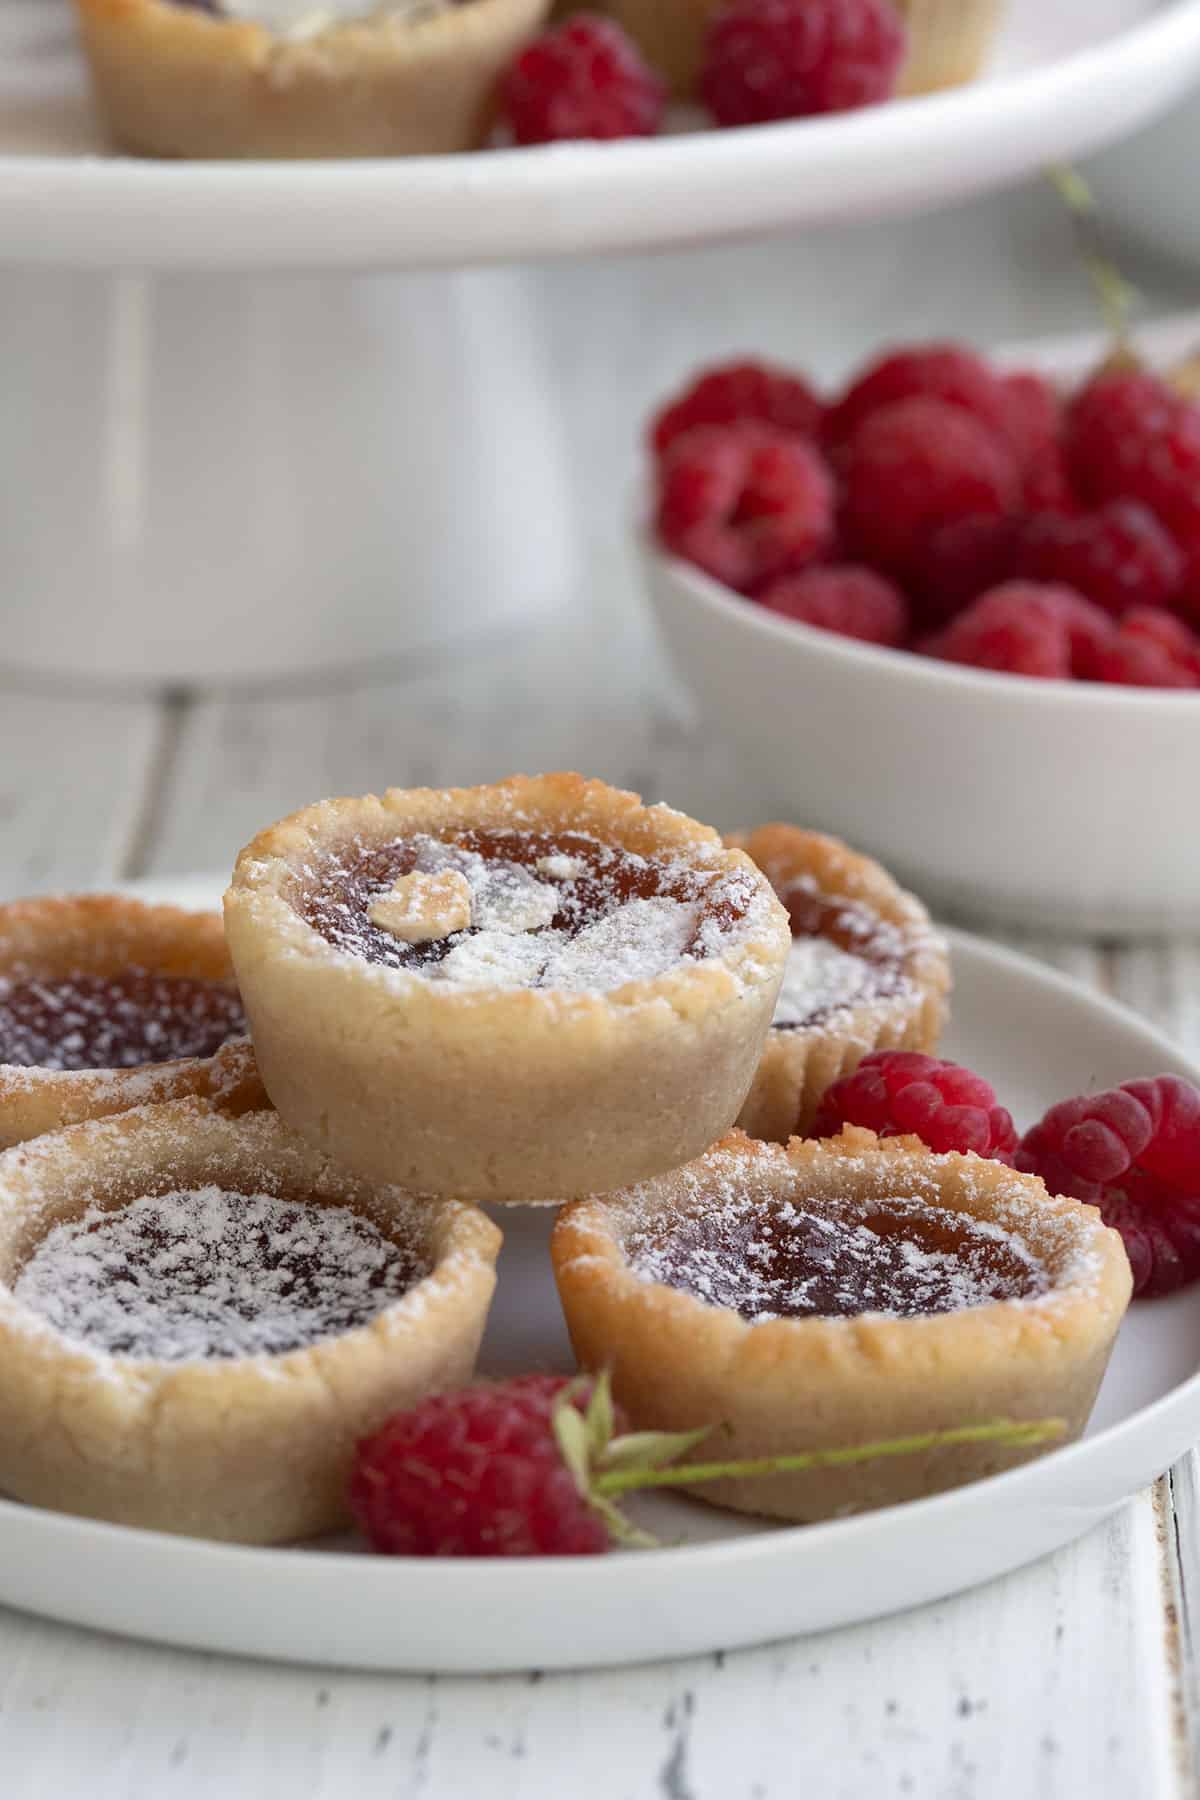 Keto jam tarts on a white plate with raspberries.